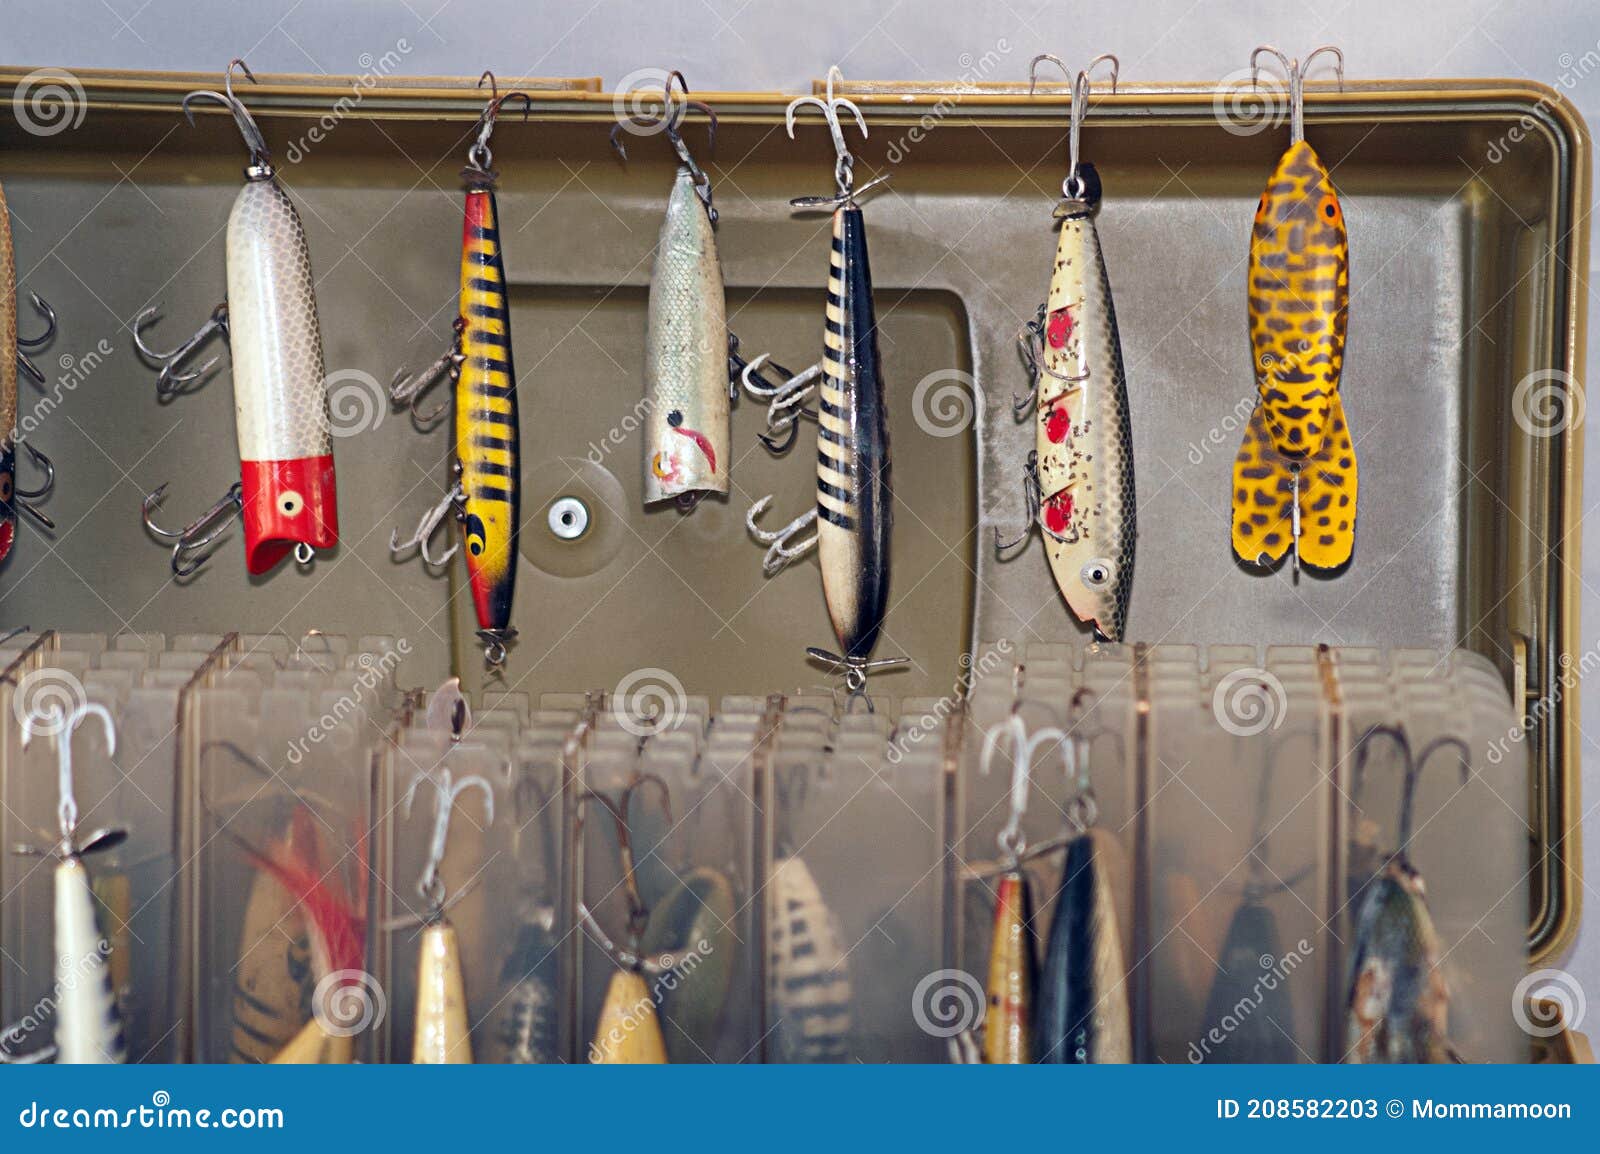 https://thumbs.dreamstime.com/z/rare-collection-old-fishing-lures-hanging-tacklebox-fisherman-s-tackle-box-208582203.jpg